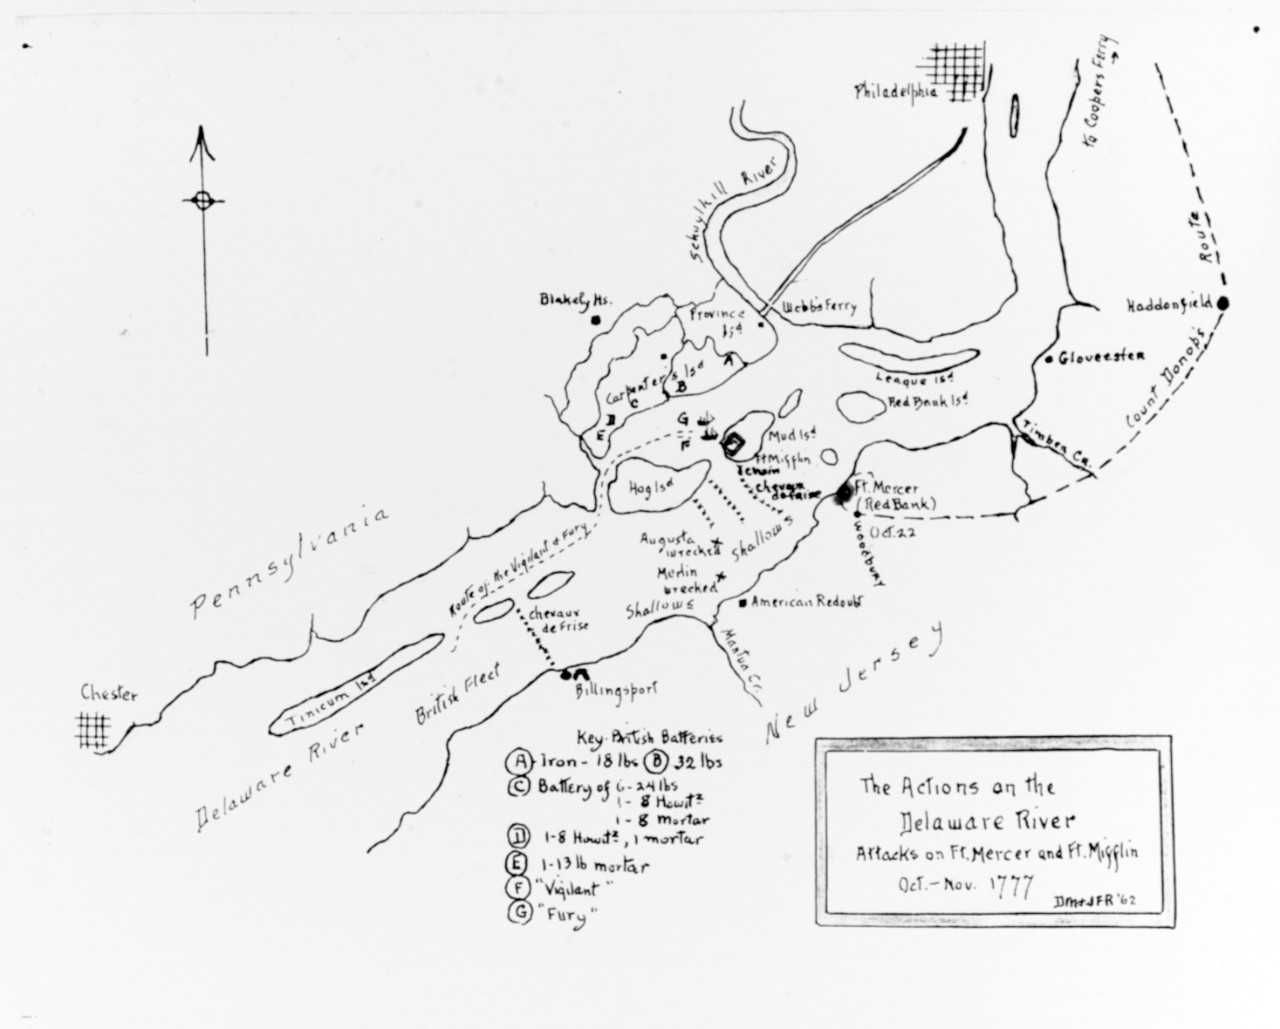 Map of Actions on the Delaware near Philadelphia during the Attack on Fort Mifflin and Fort Mercer, October 1777